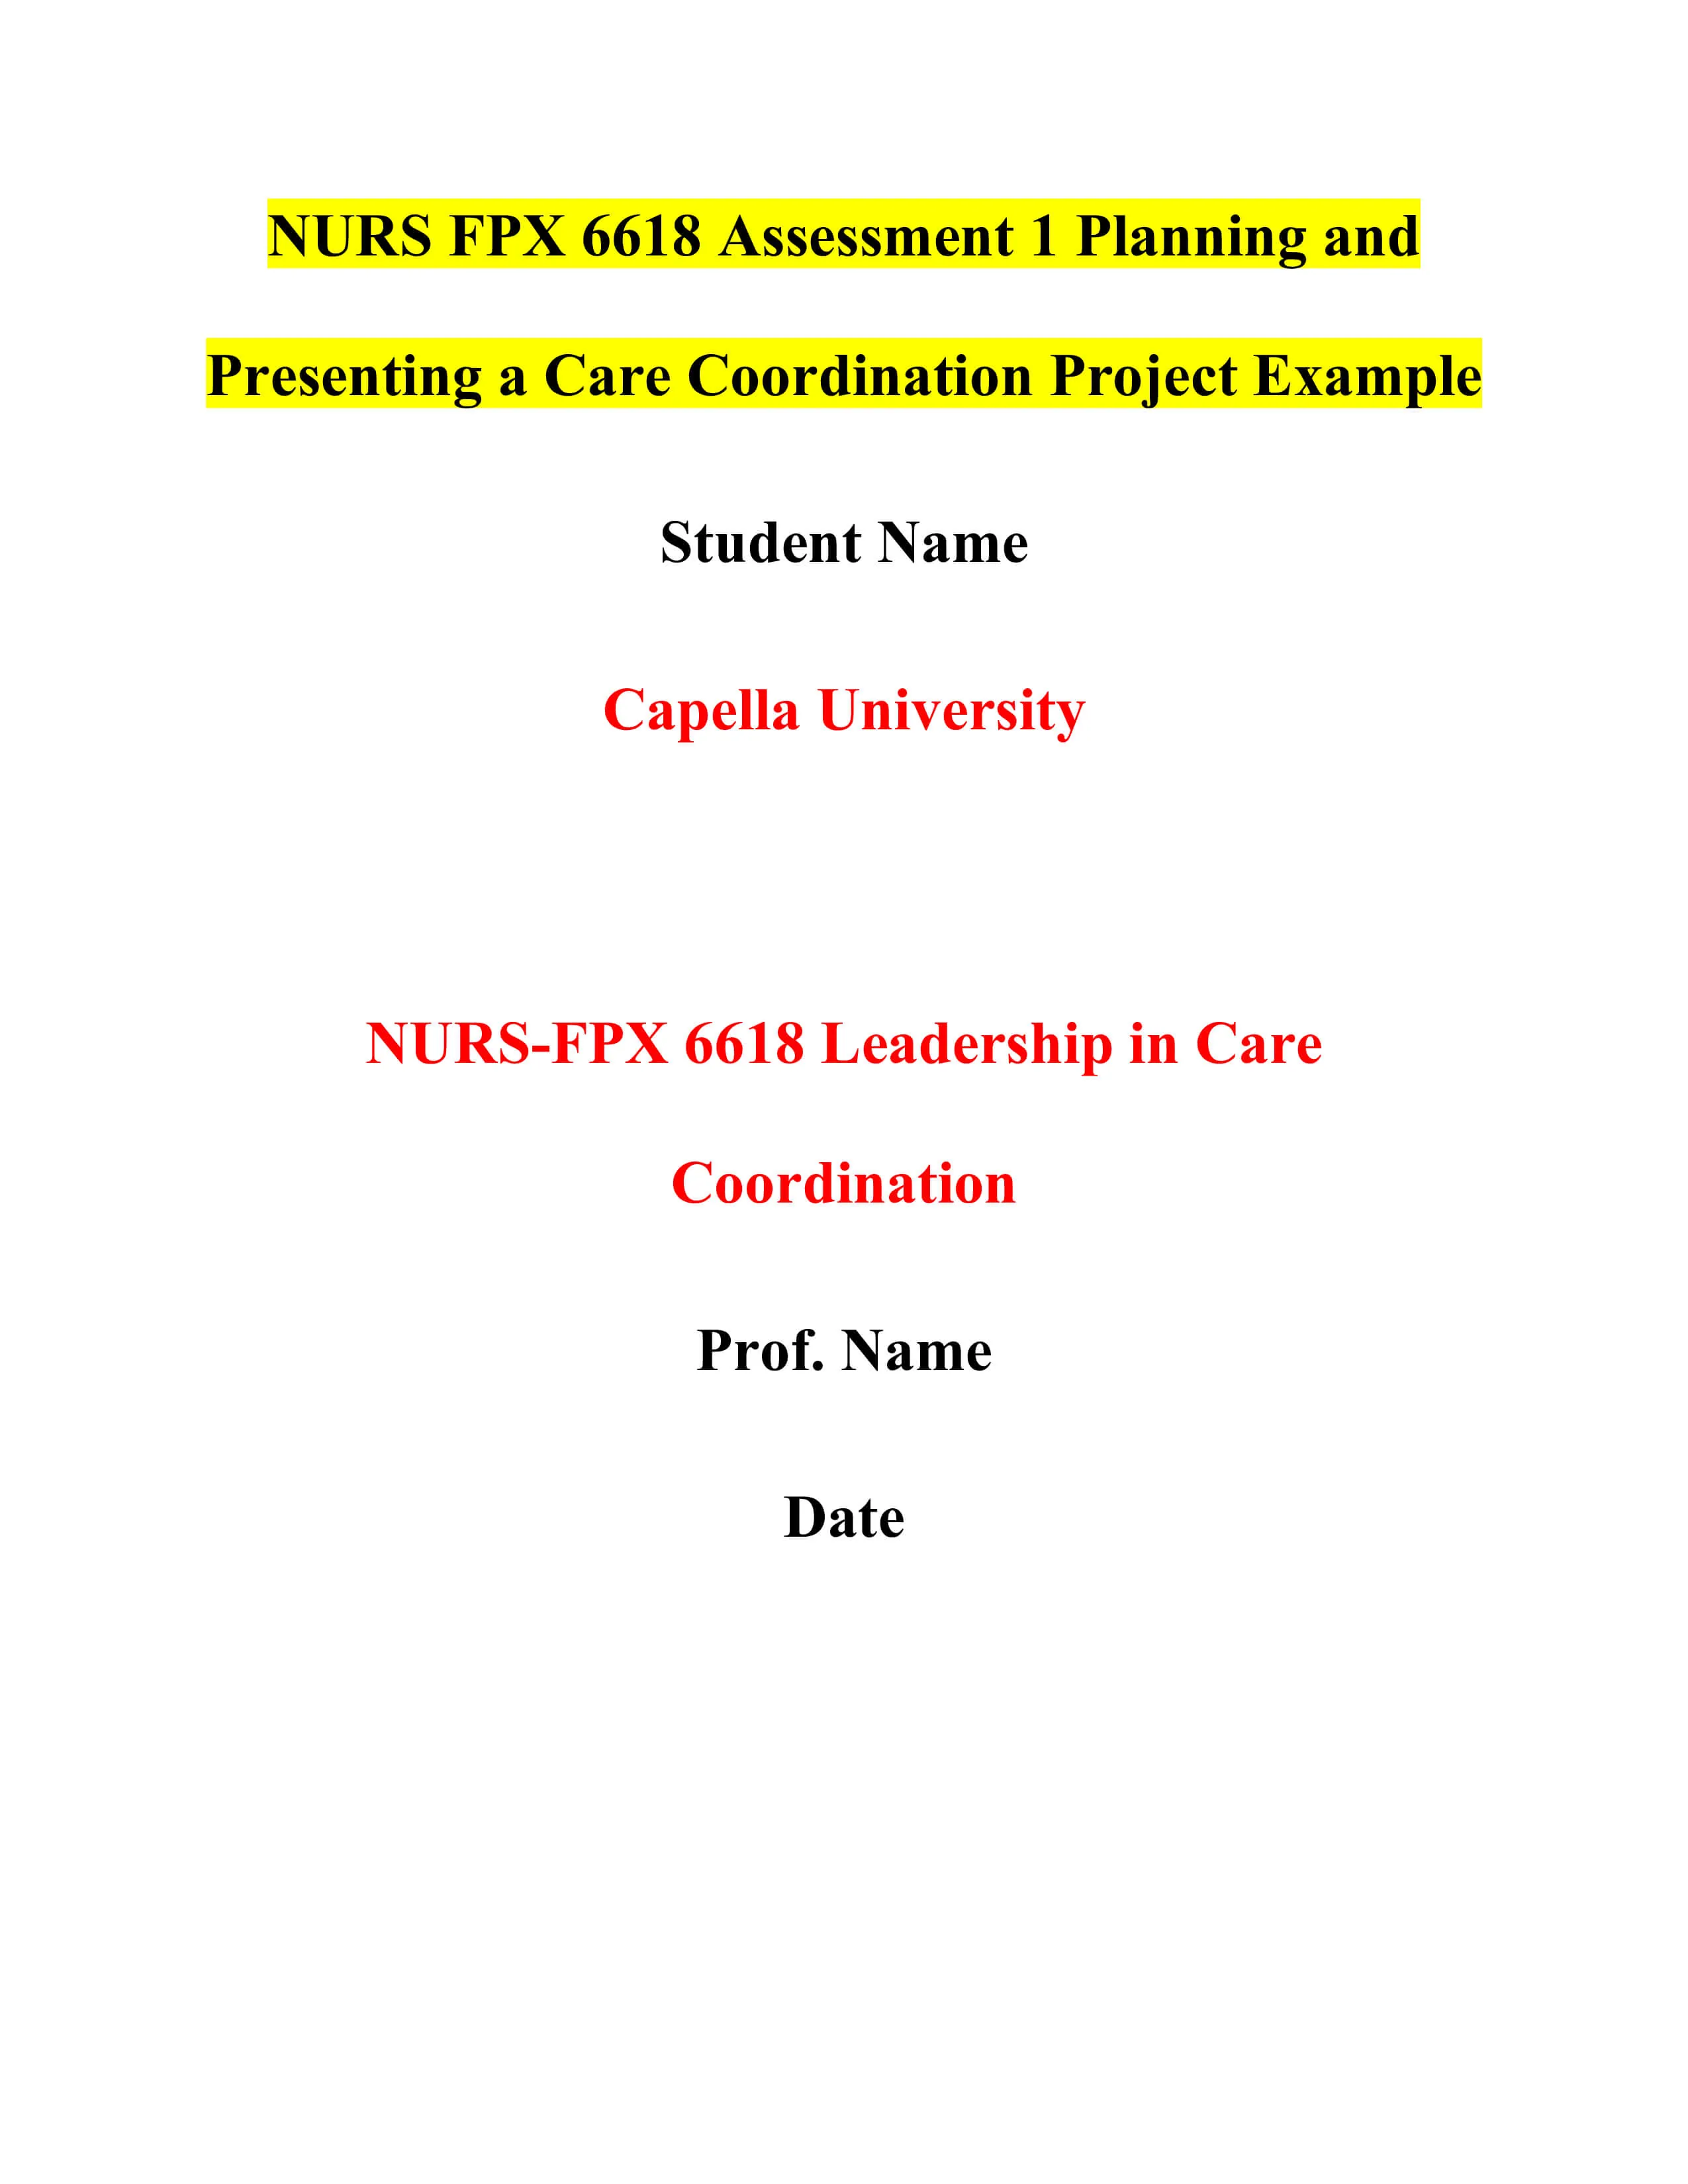 NURS FPX 6618 Assessment 1 Planning and Presenting a Care Coordination Project